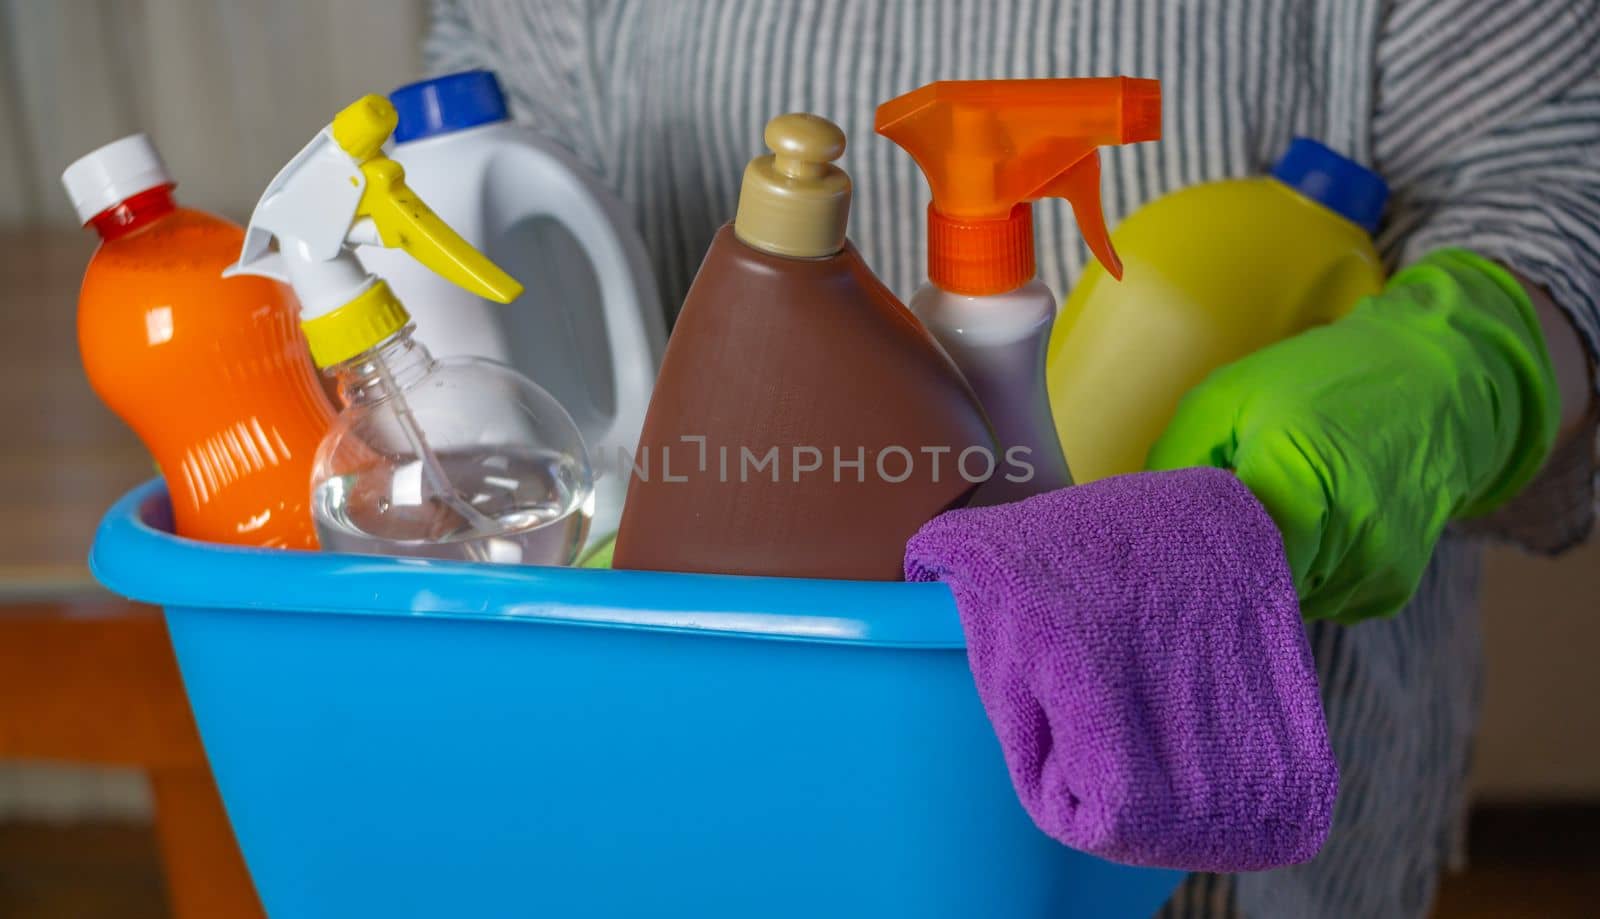 cleaning products used by a woman by joseantona